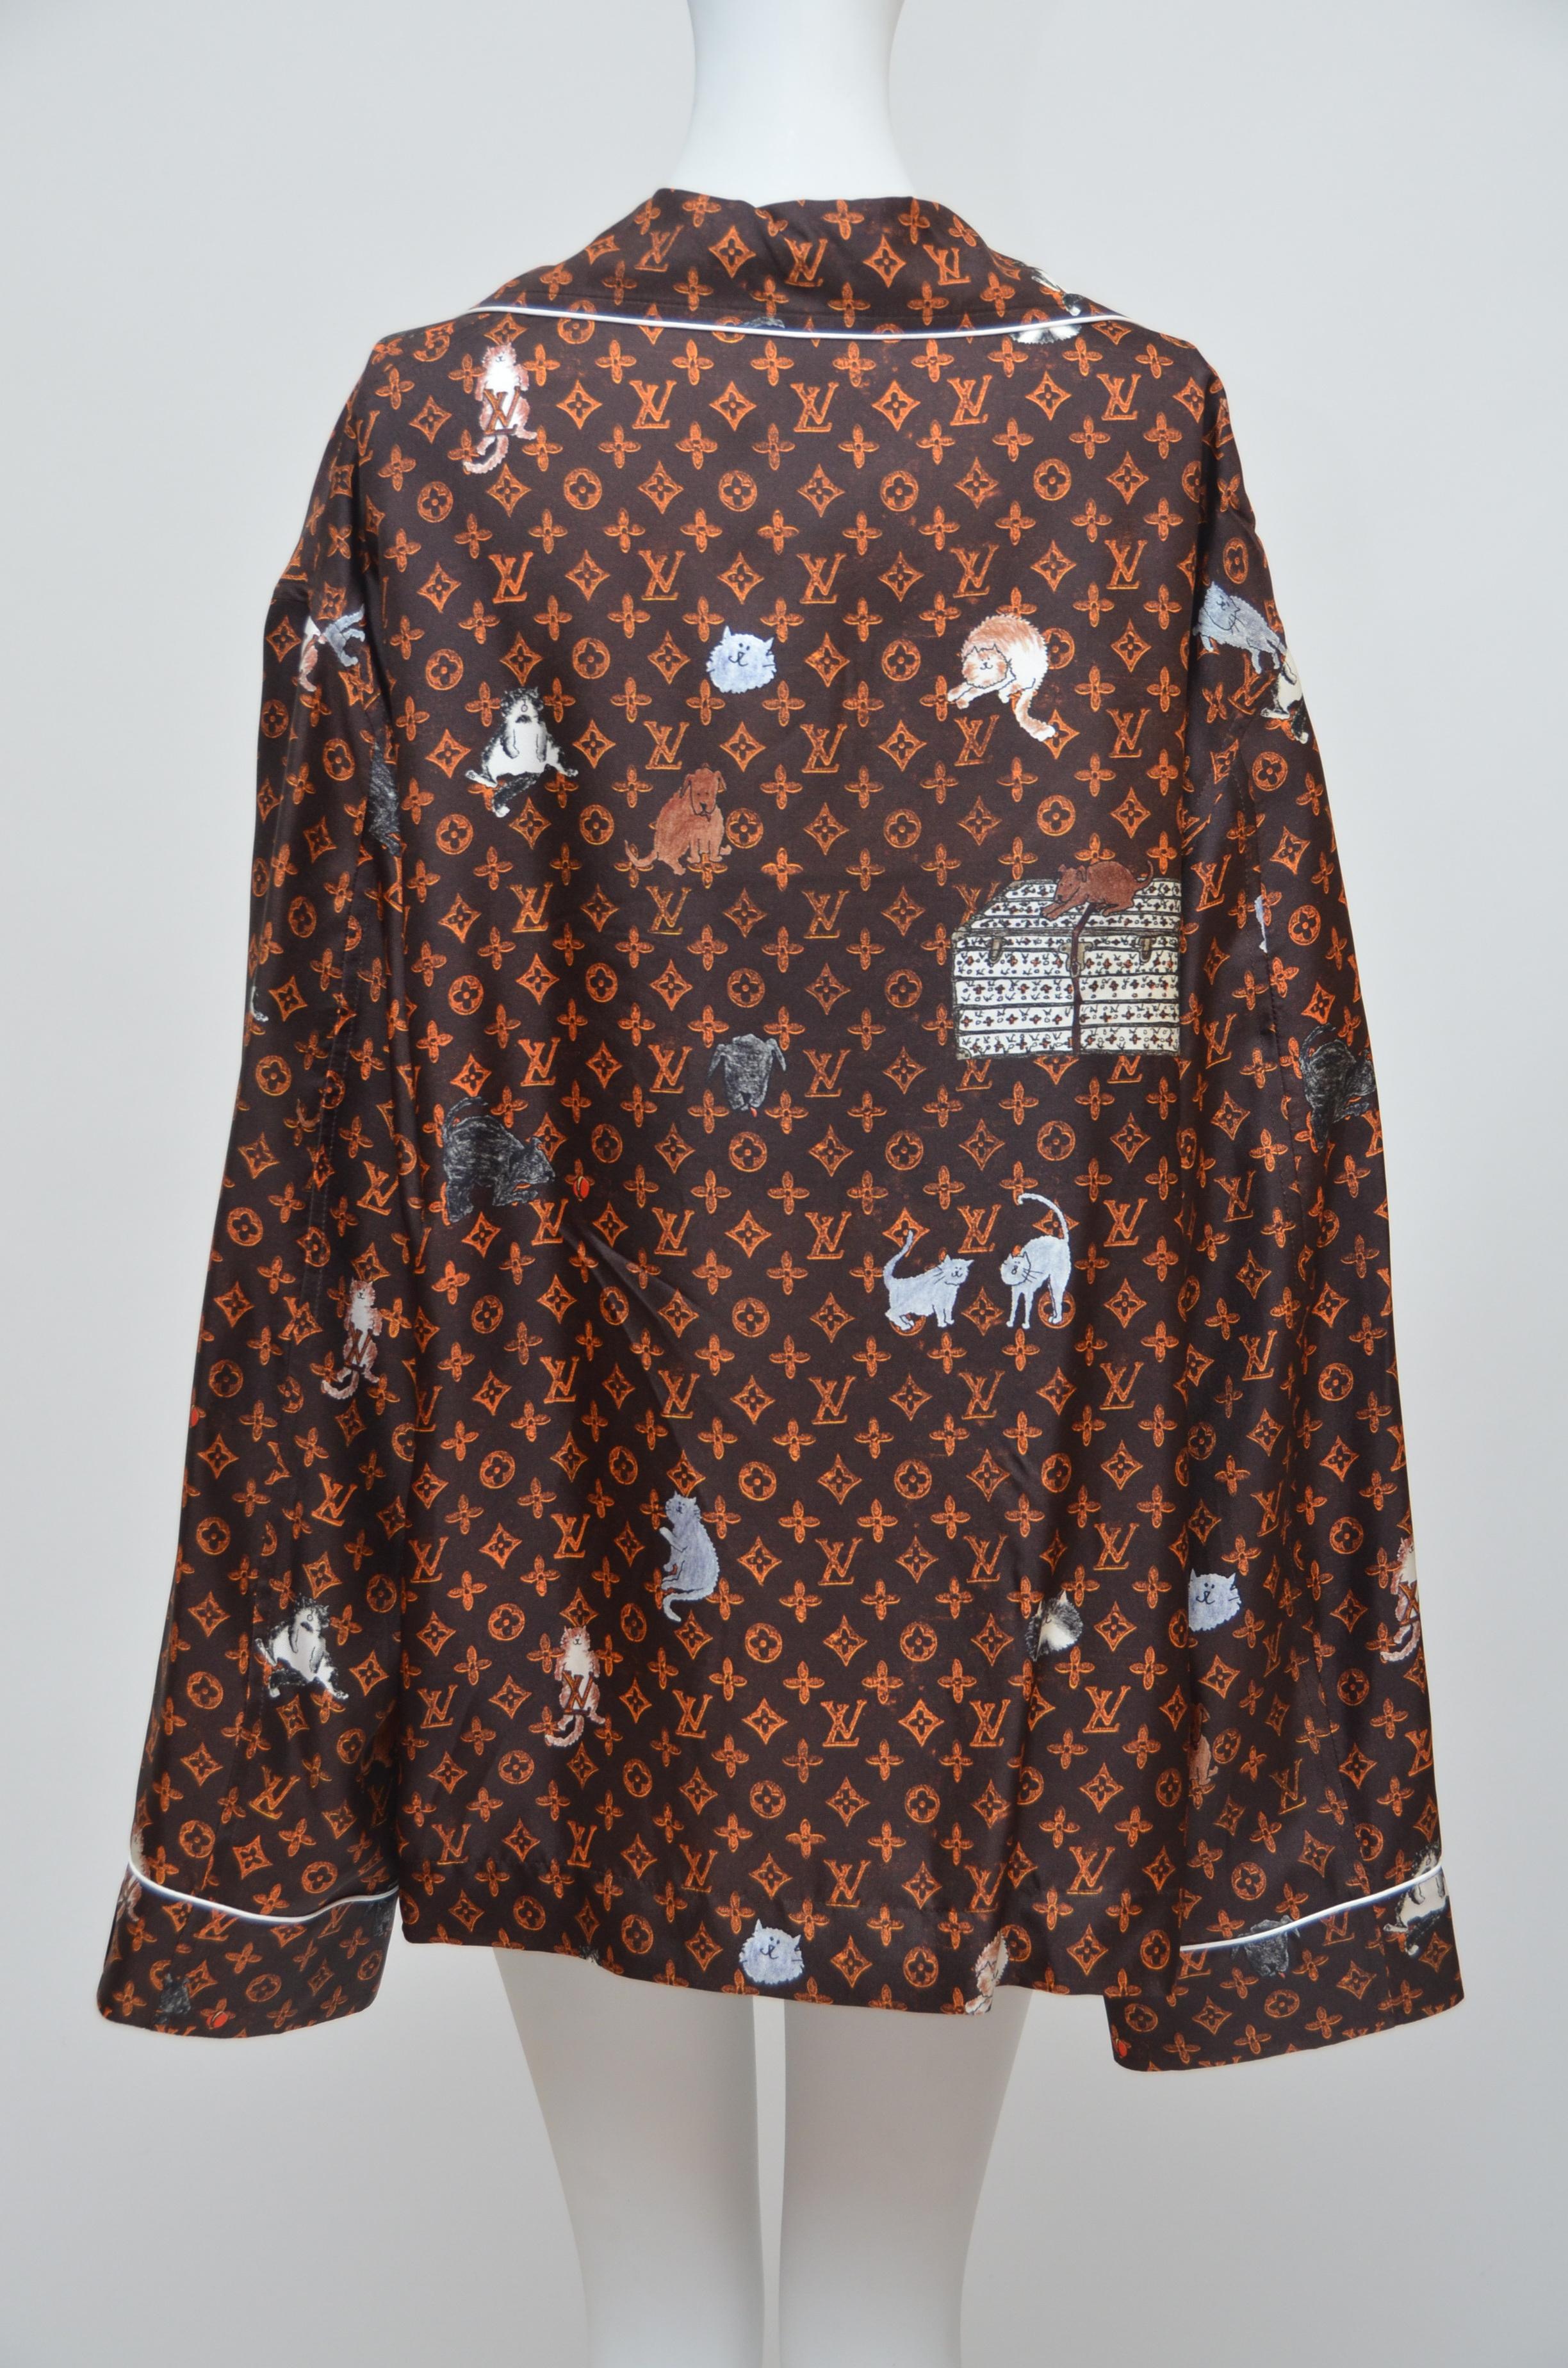 100% authentic  LOUIS VUITTON X  Grace Coddington Collaboration  Catogram Silk shirt
New with tags attached.
photographed on mannequin size 2US.
This piece is meant to be worn  oversized.
LV hanger and dust-bag included.
Size 40


FINAL SALE